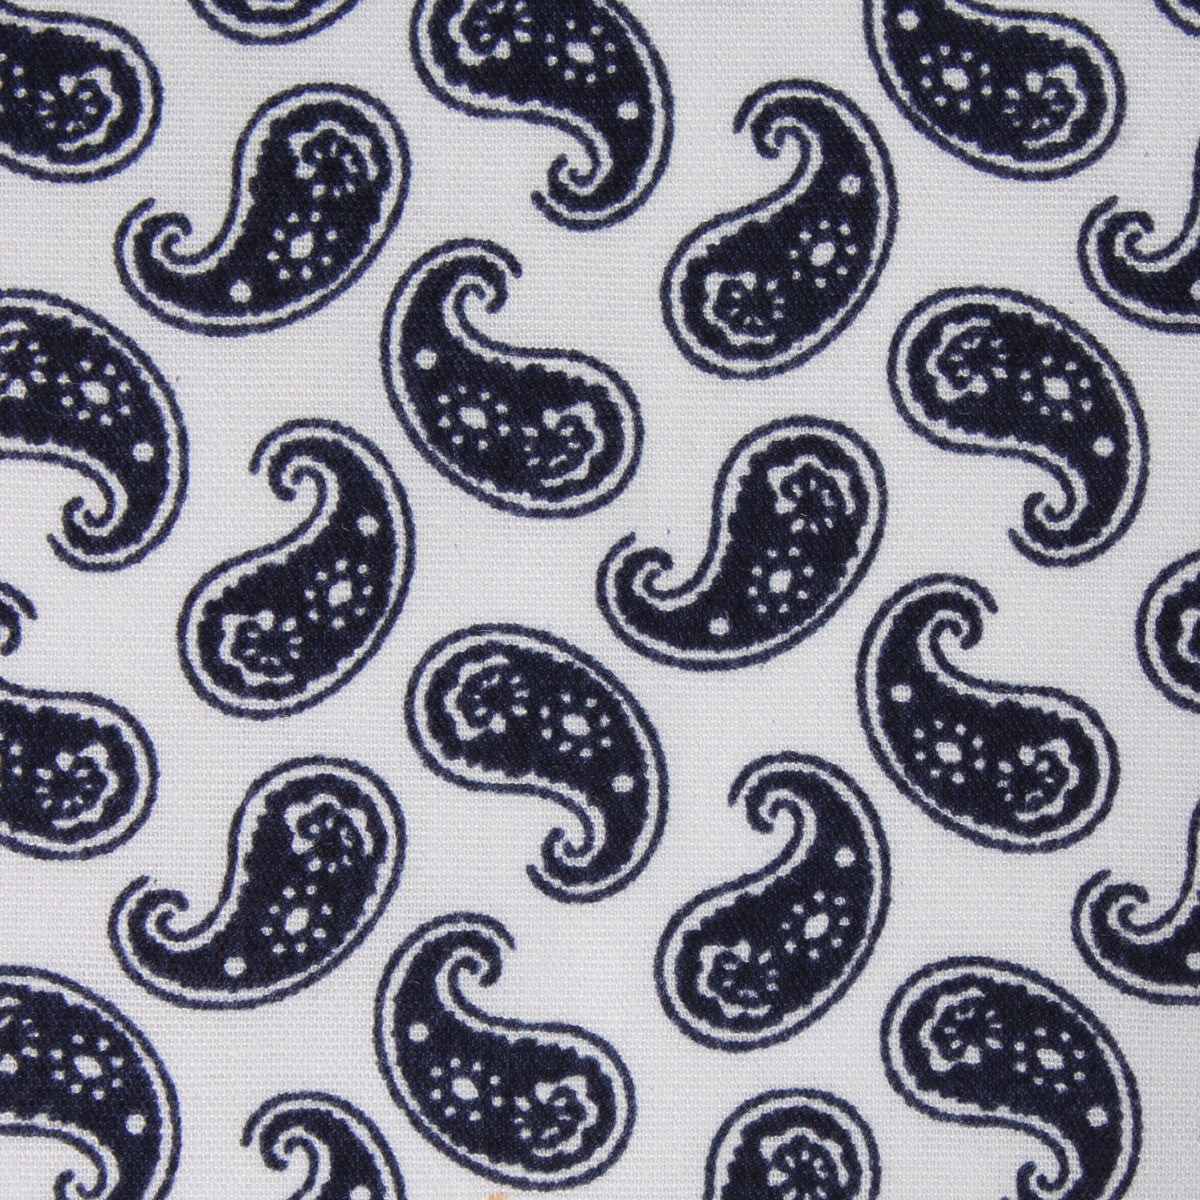 Picasso White on Blue Paisley Fabric Pocket Square